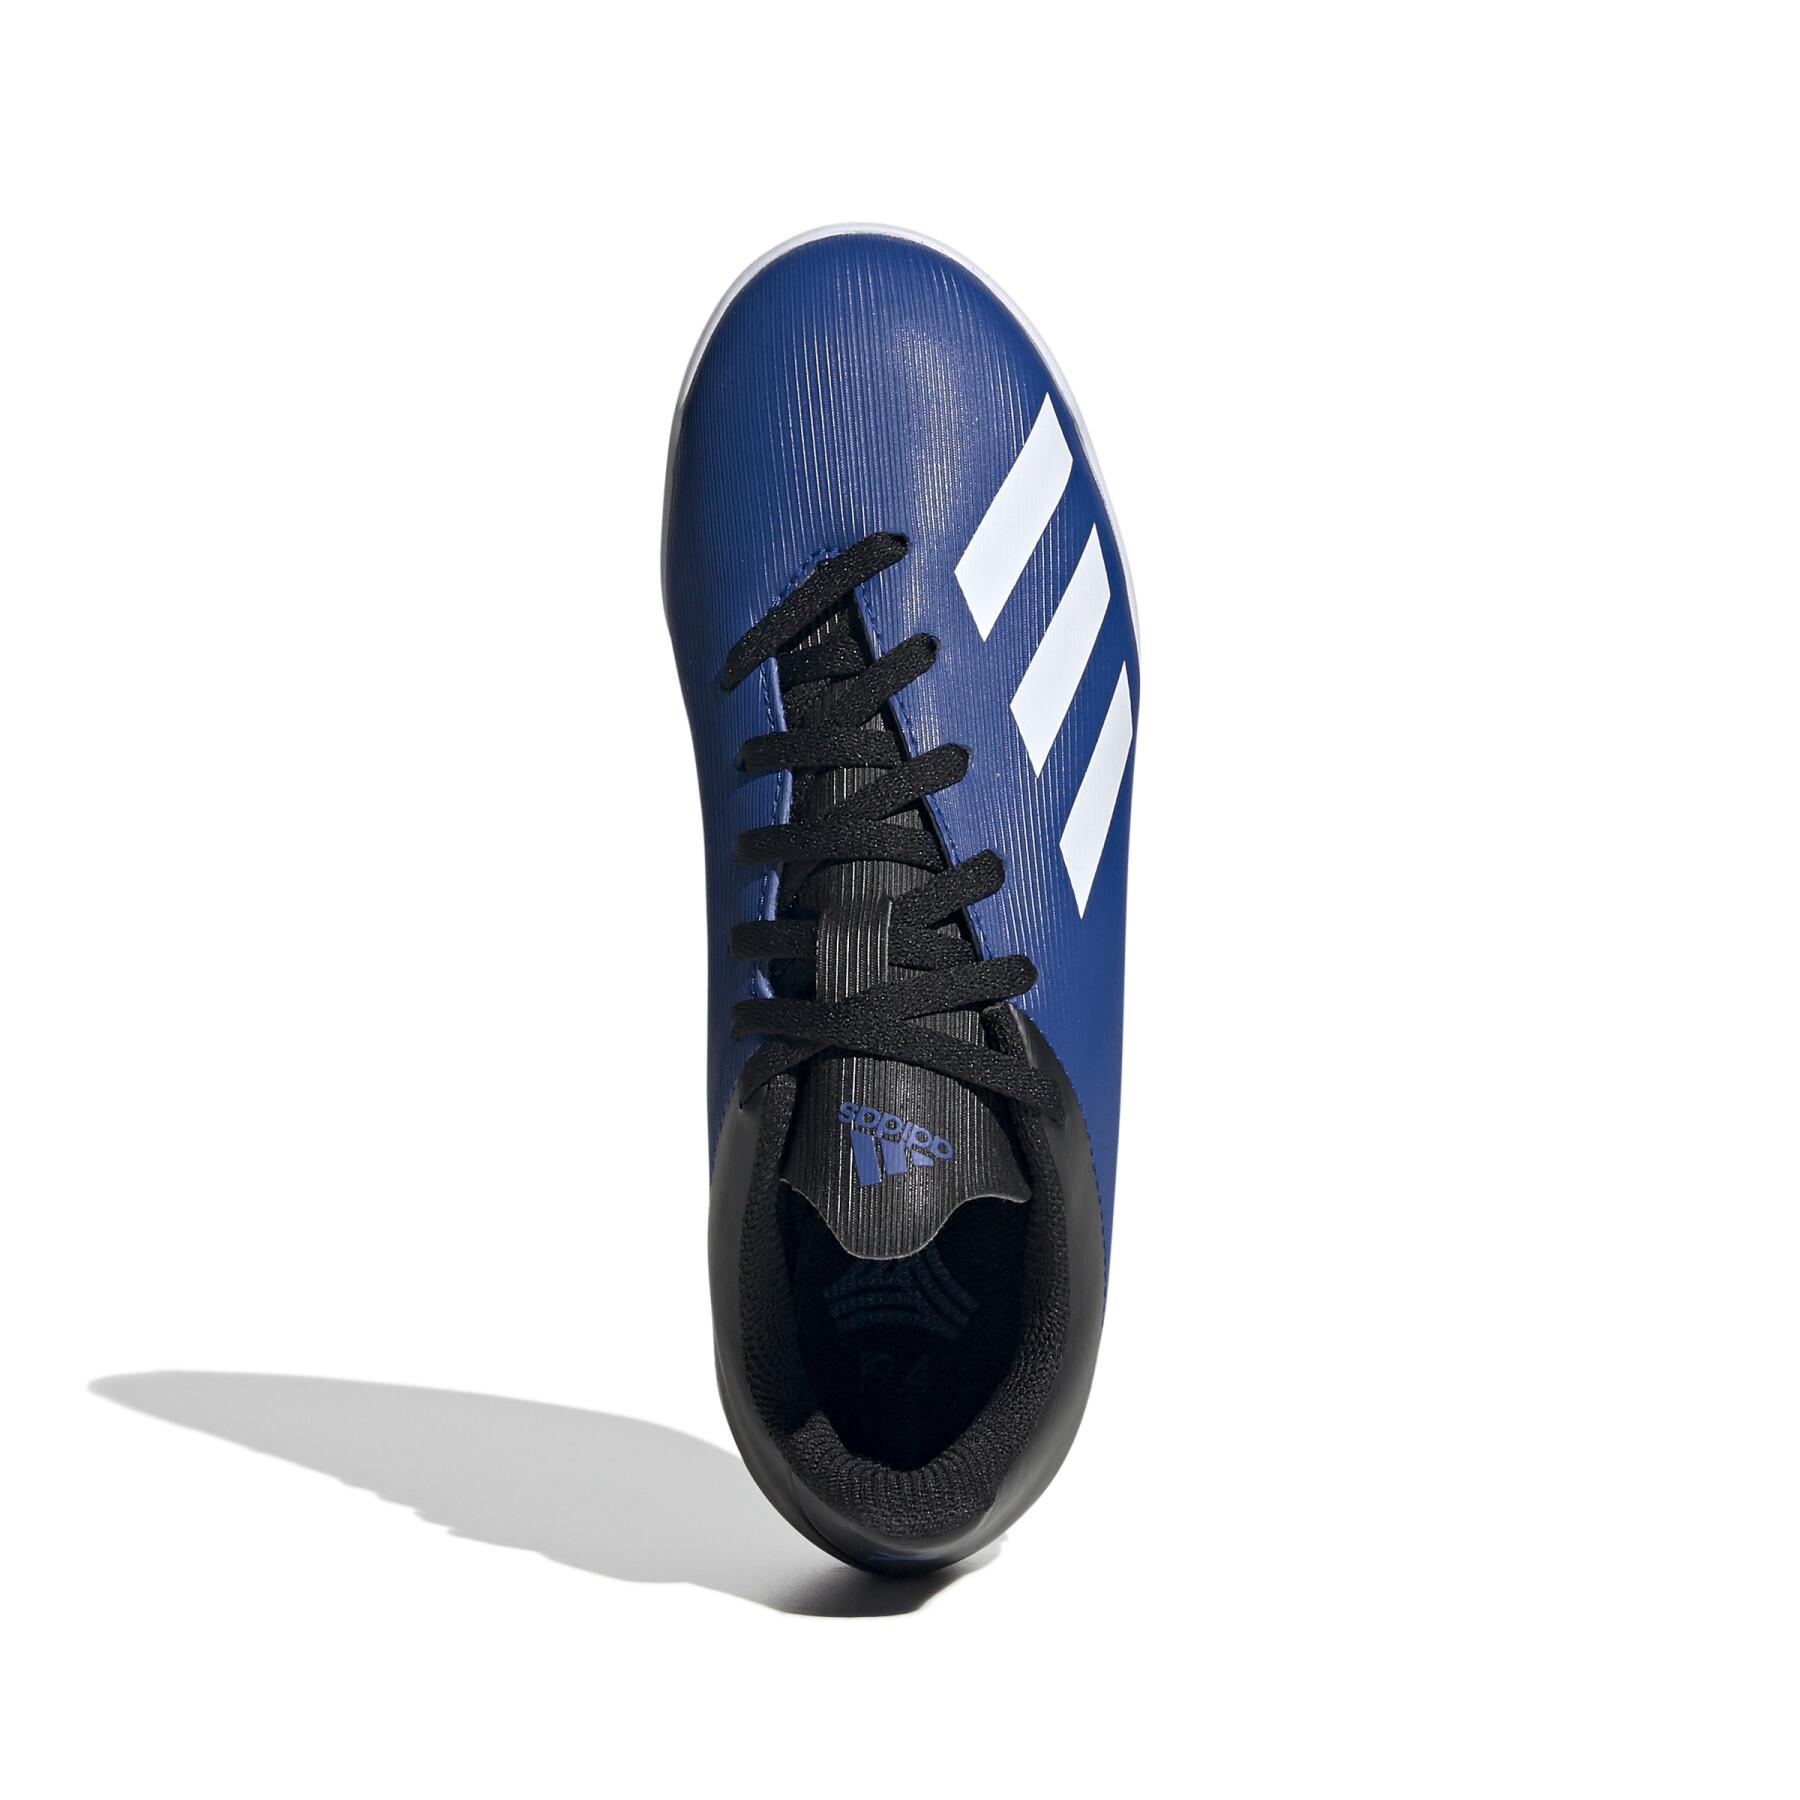 Children's soccer shoes adidas X 19.4 IN